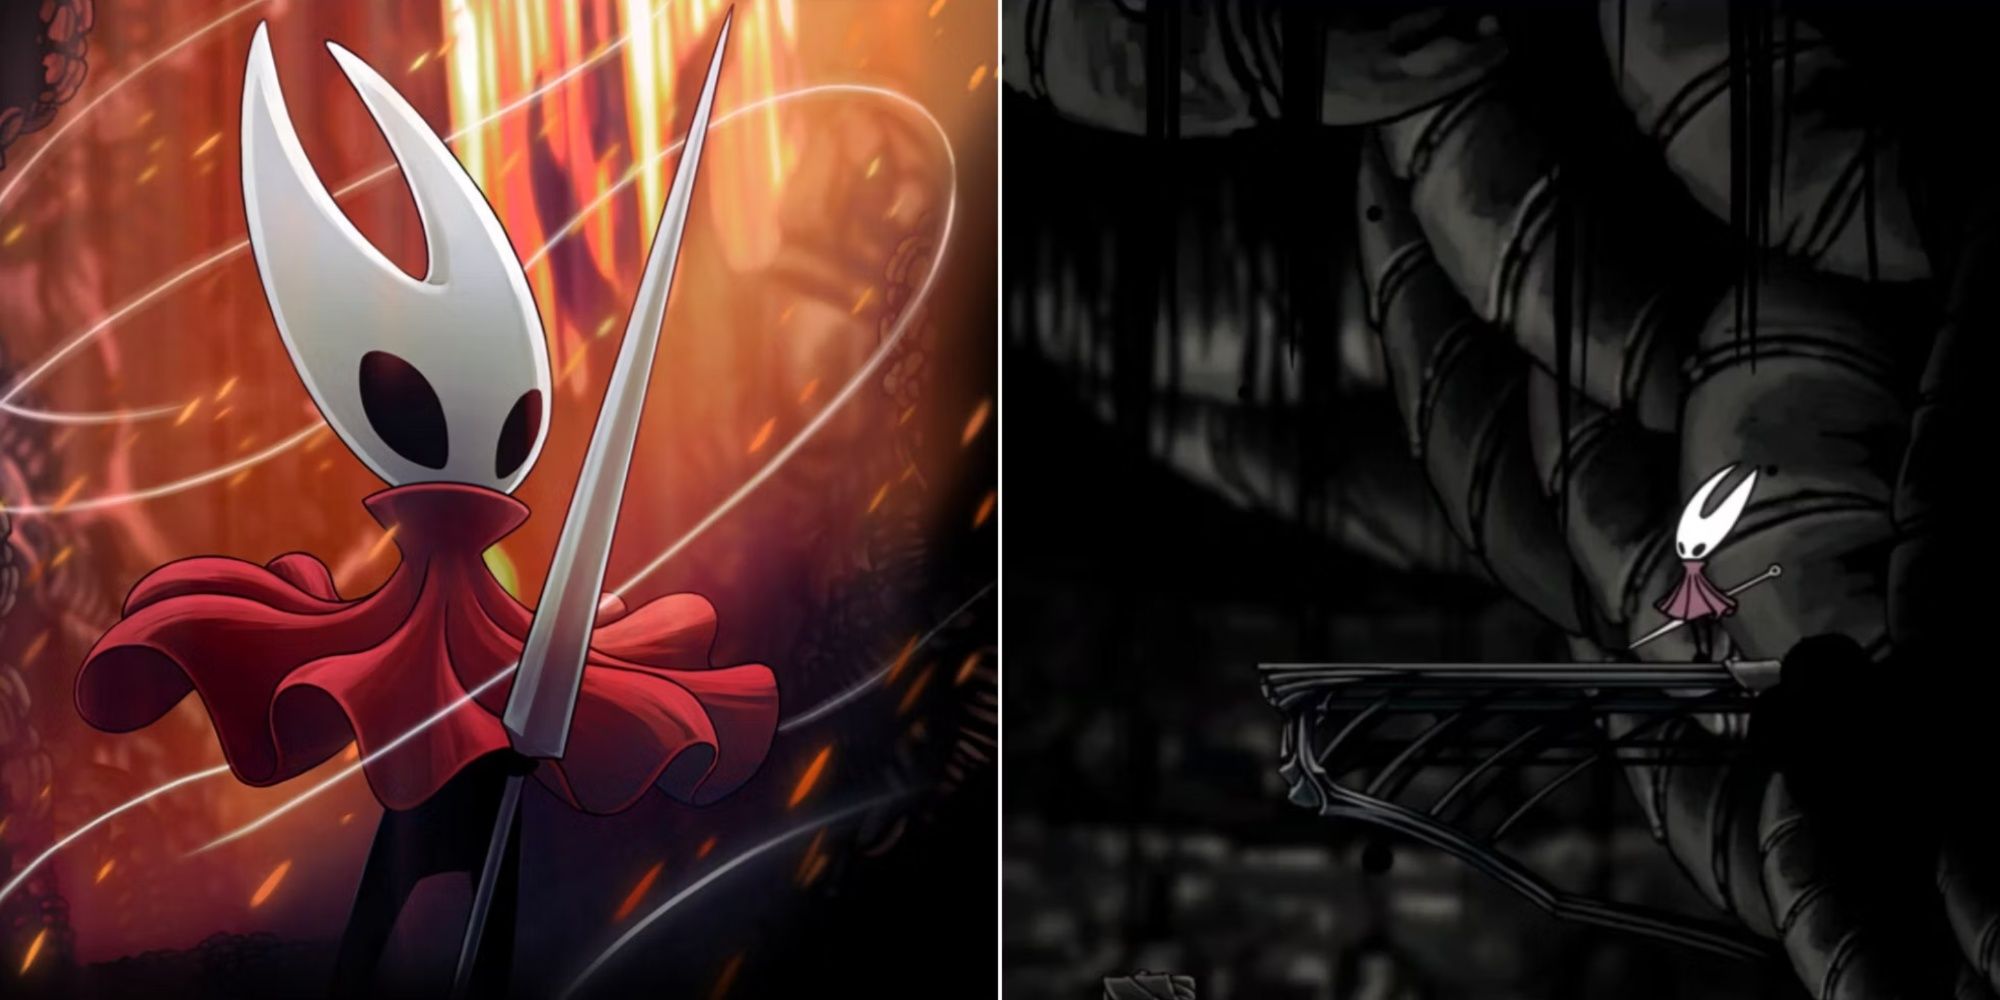 Split images of a close-up of Hornet in official art and Hornet standing on a ledge in Hollow Knight.